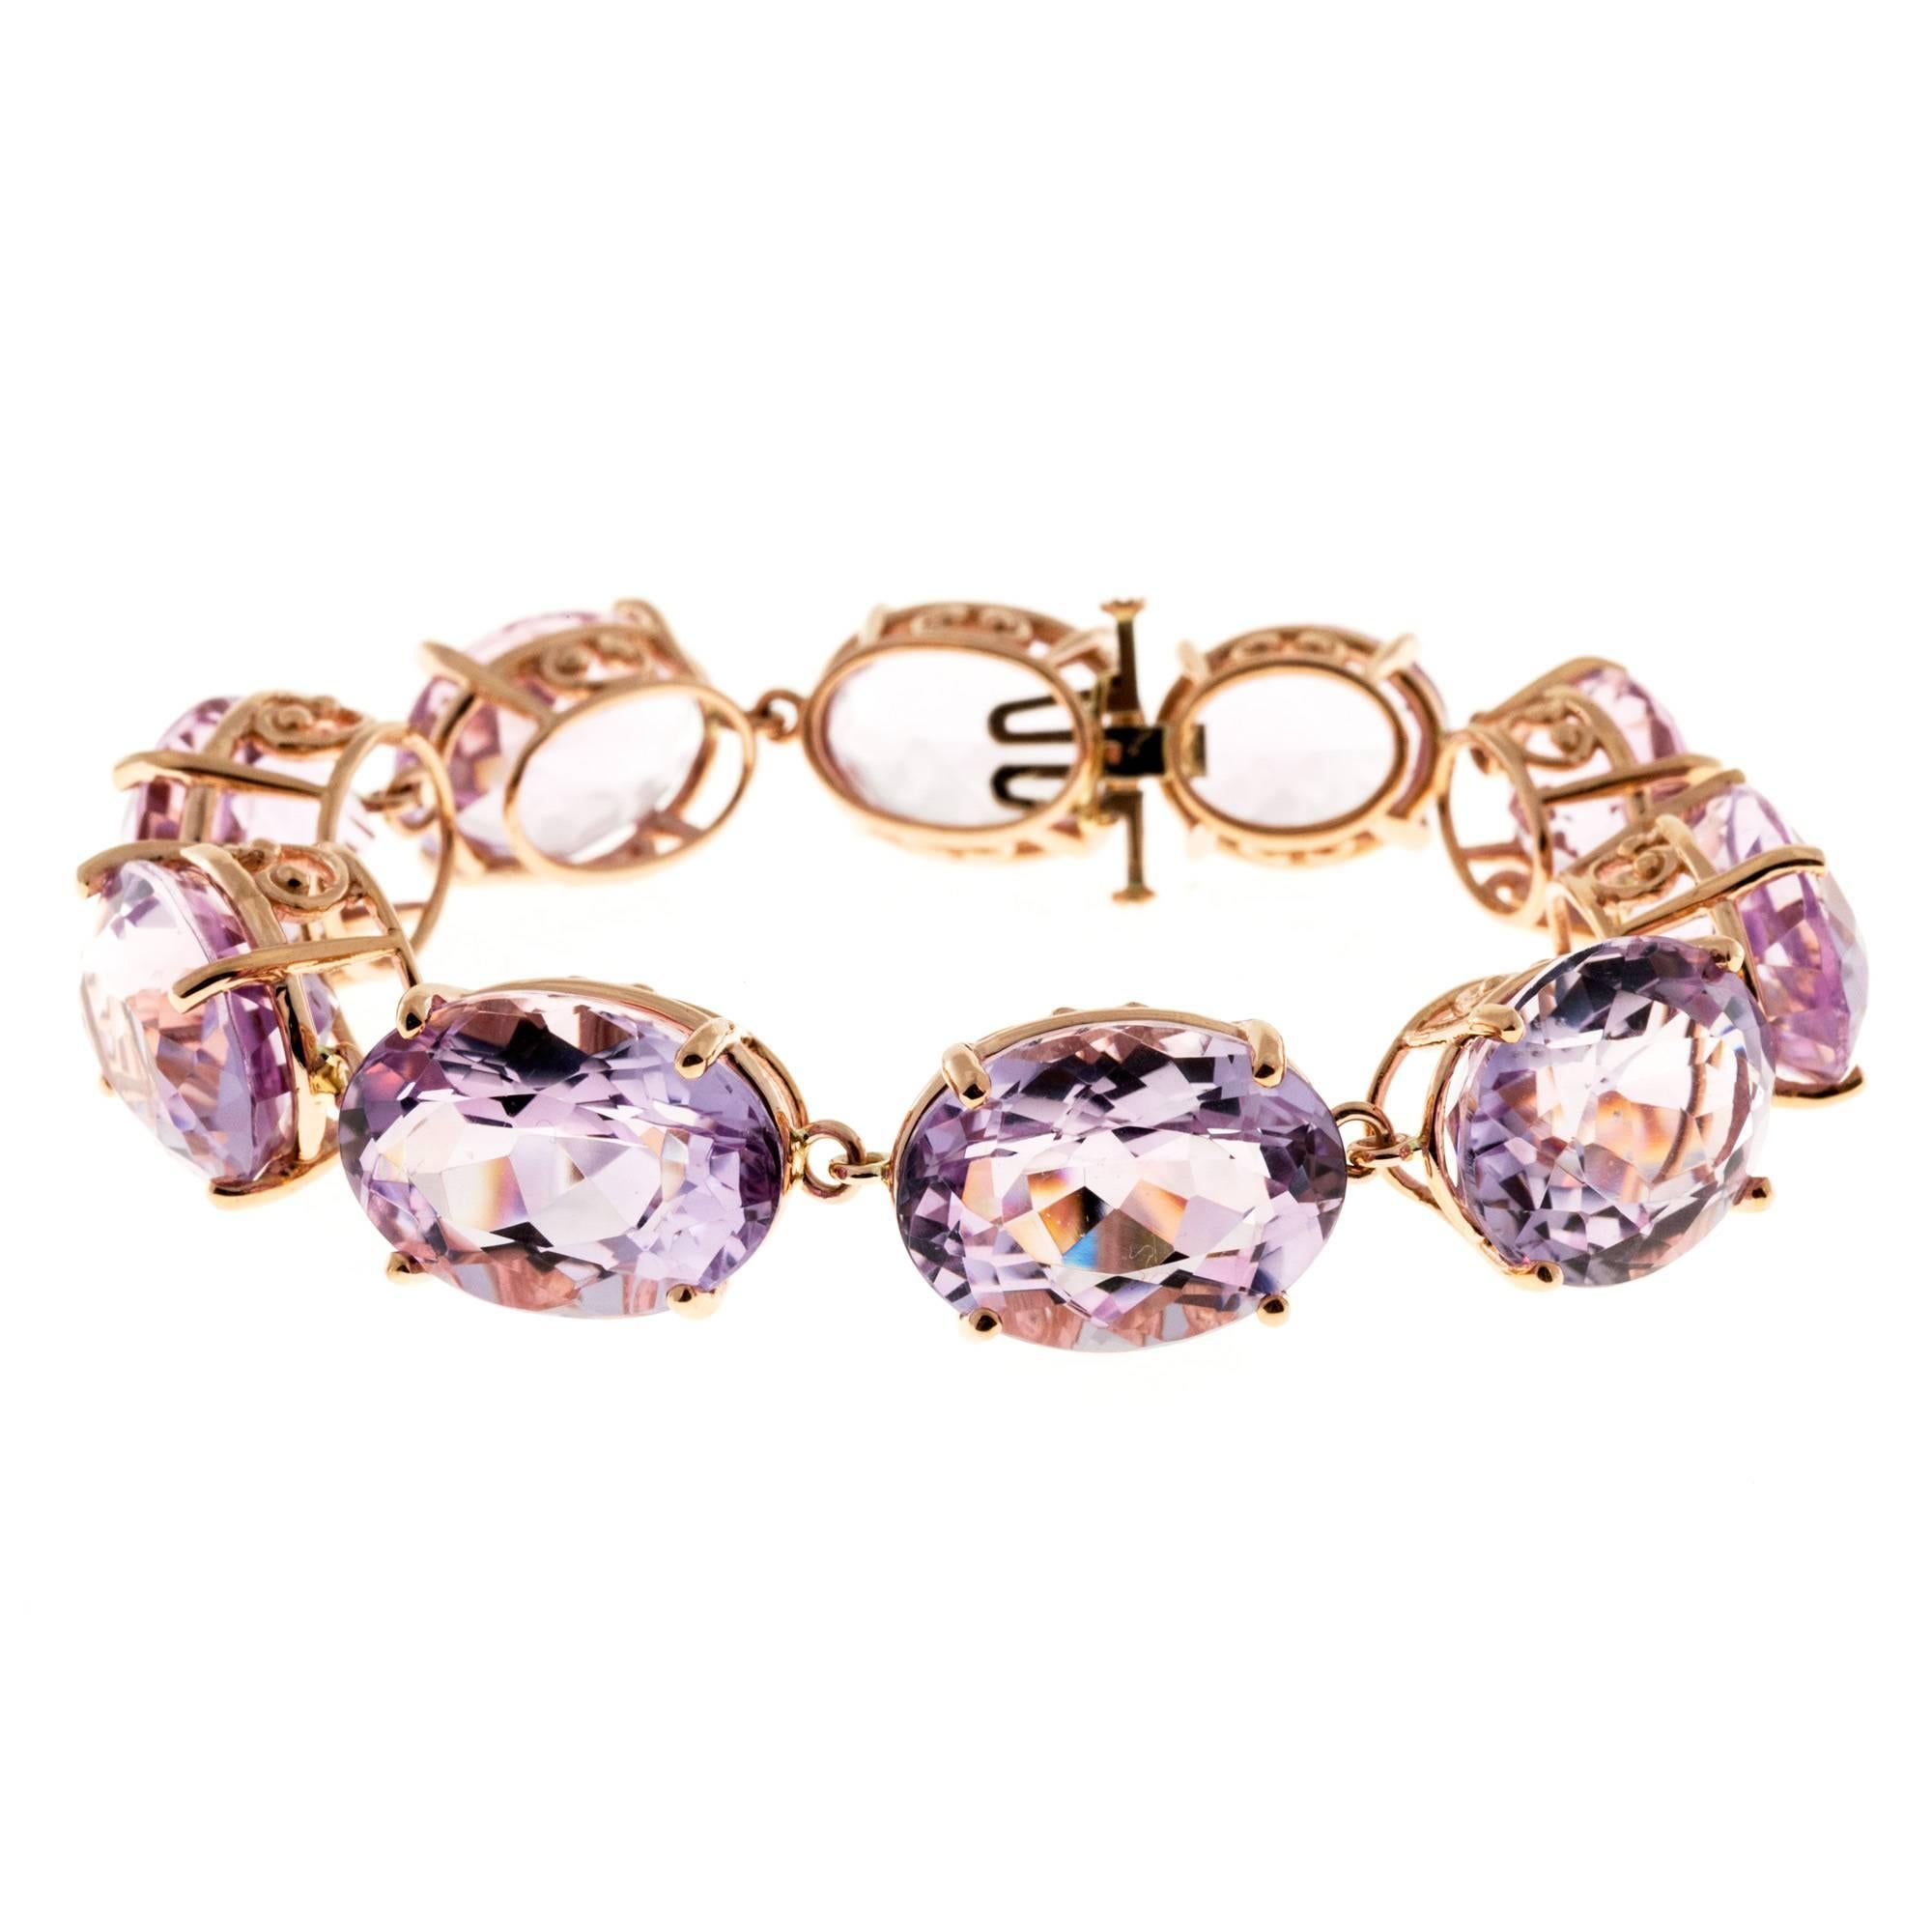 Lilac purple untreated Amethyst Riviere Bracelet. The stones are natural and slightly different shape and depth.  New rose gold settings were made for each stone in the original style of scroll basket. All Amethyst were re-polished. A necklace is